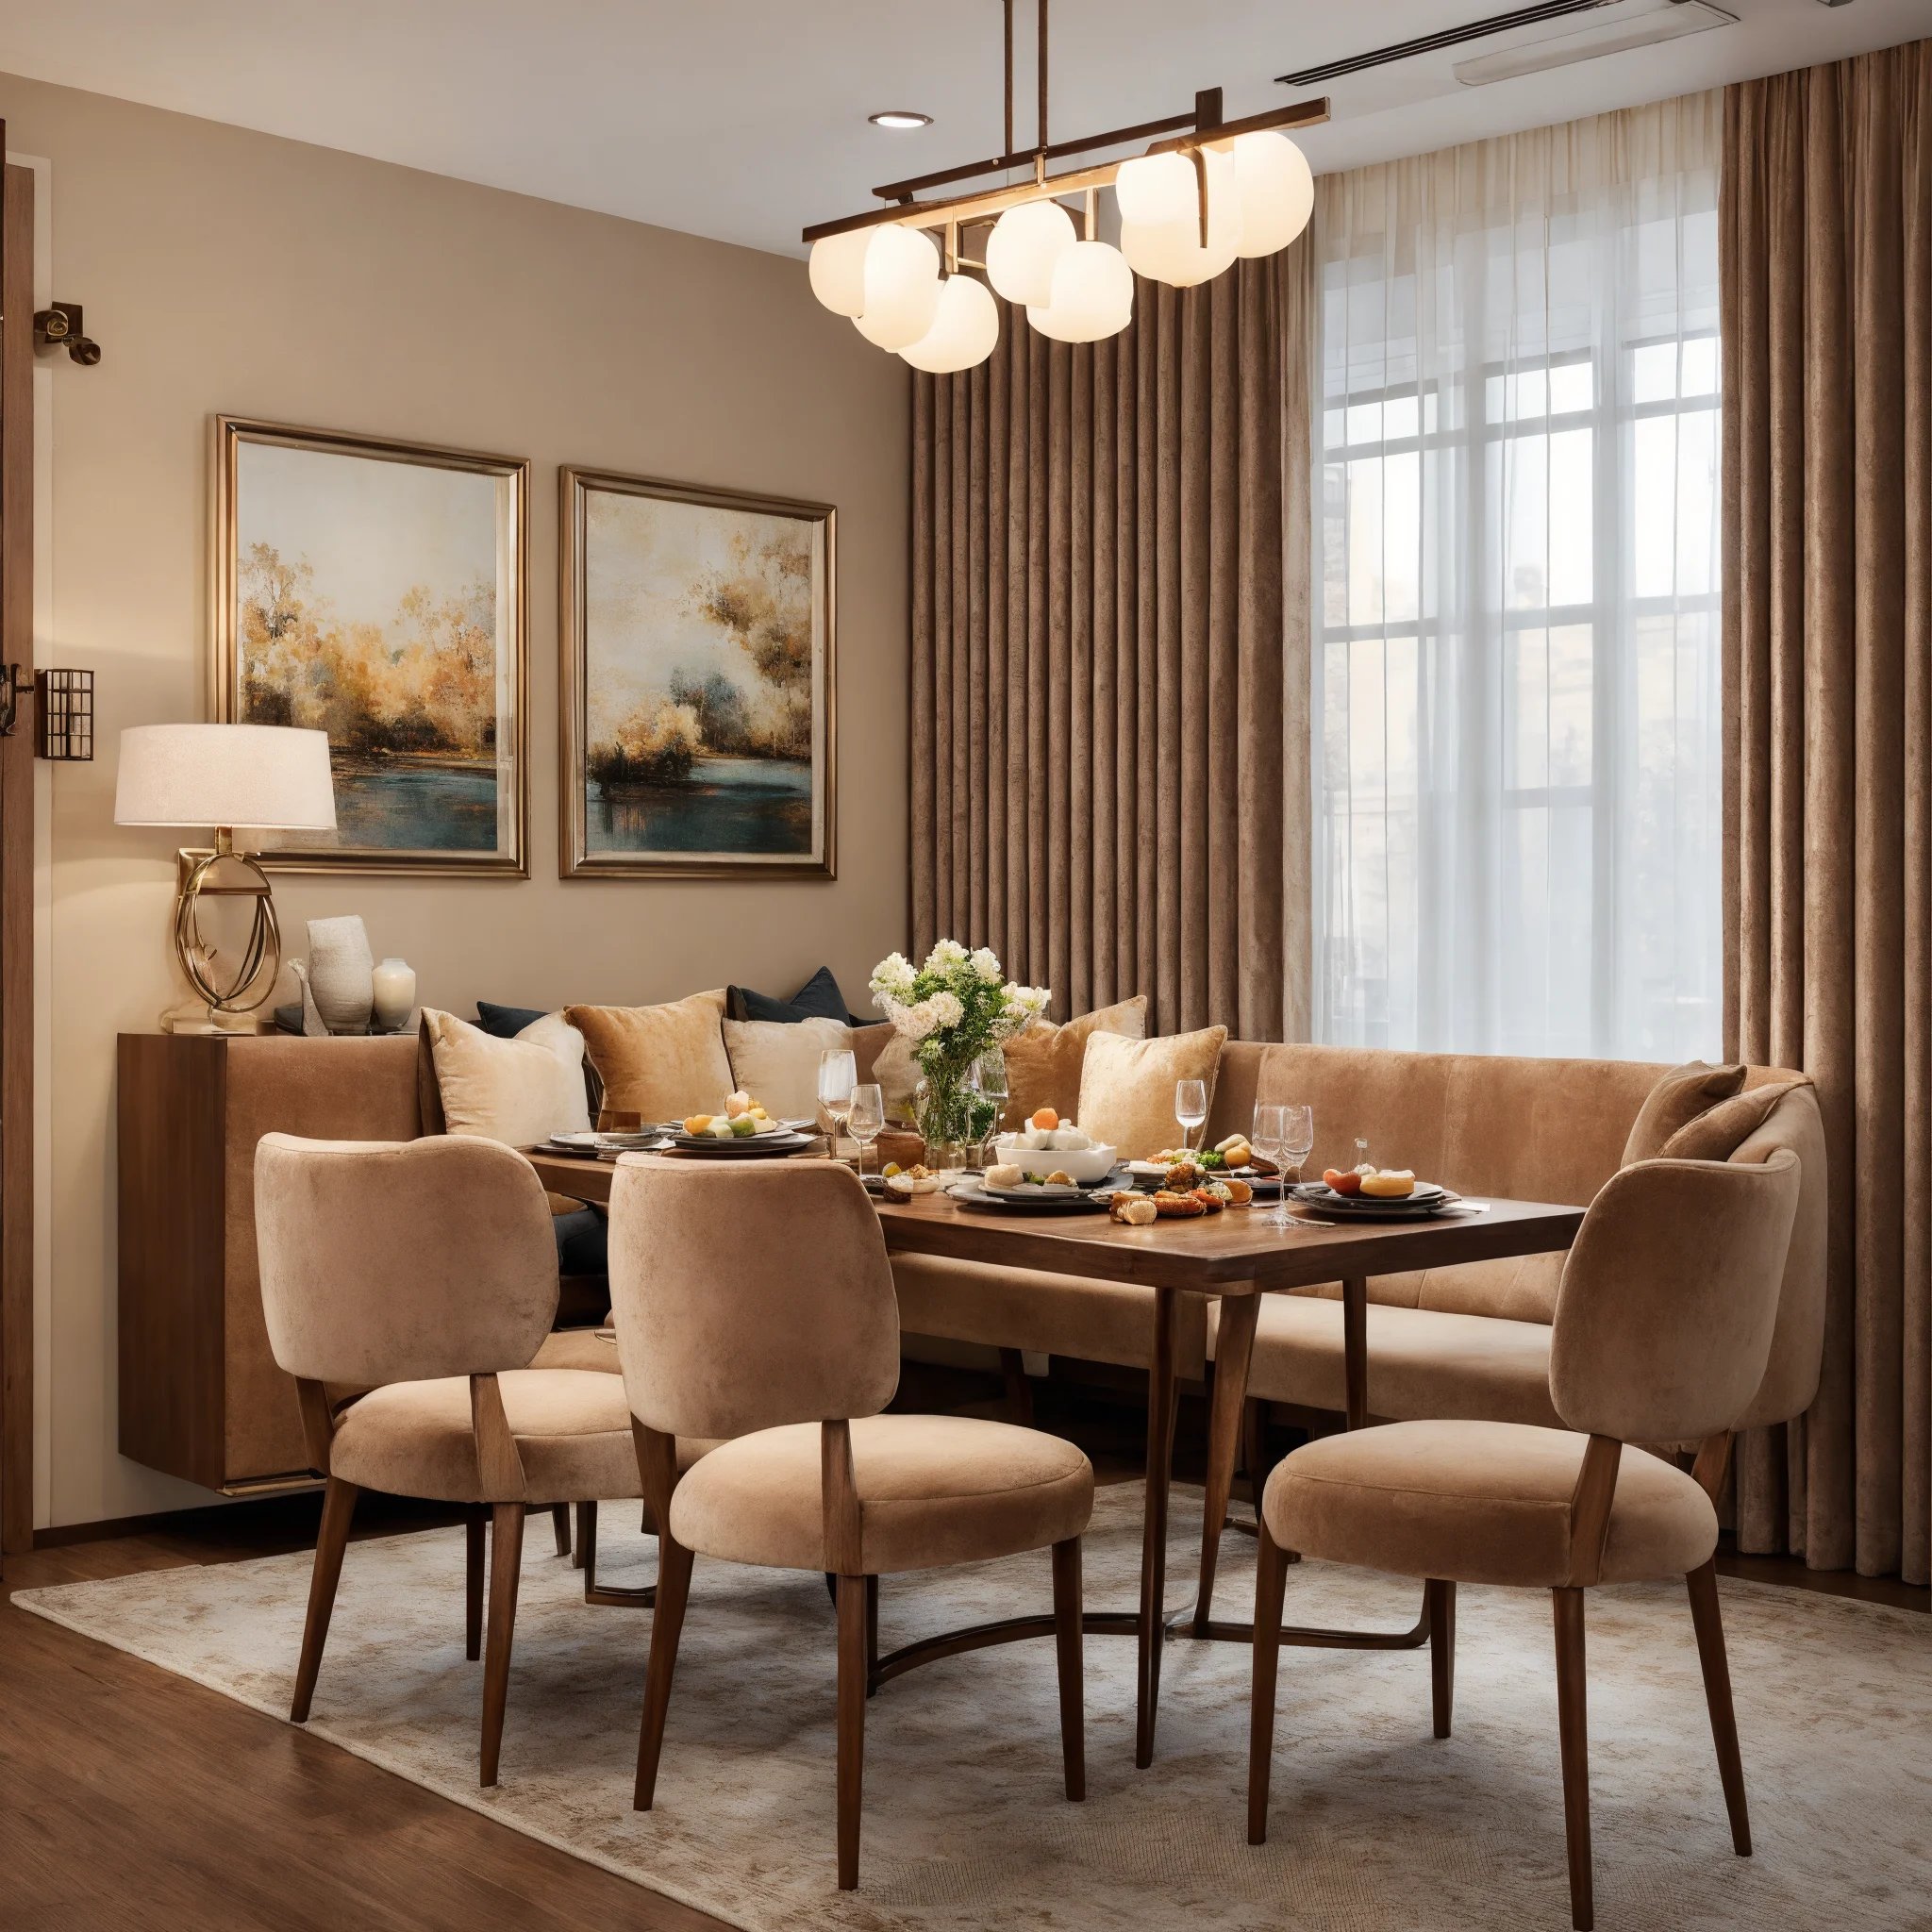 create a cozy and pleasant dining area where you c